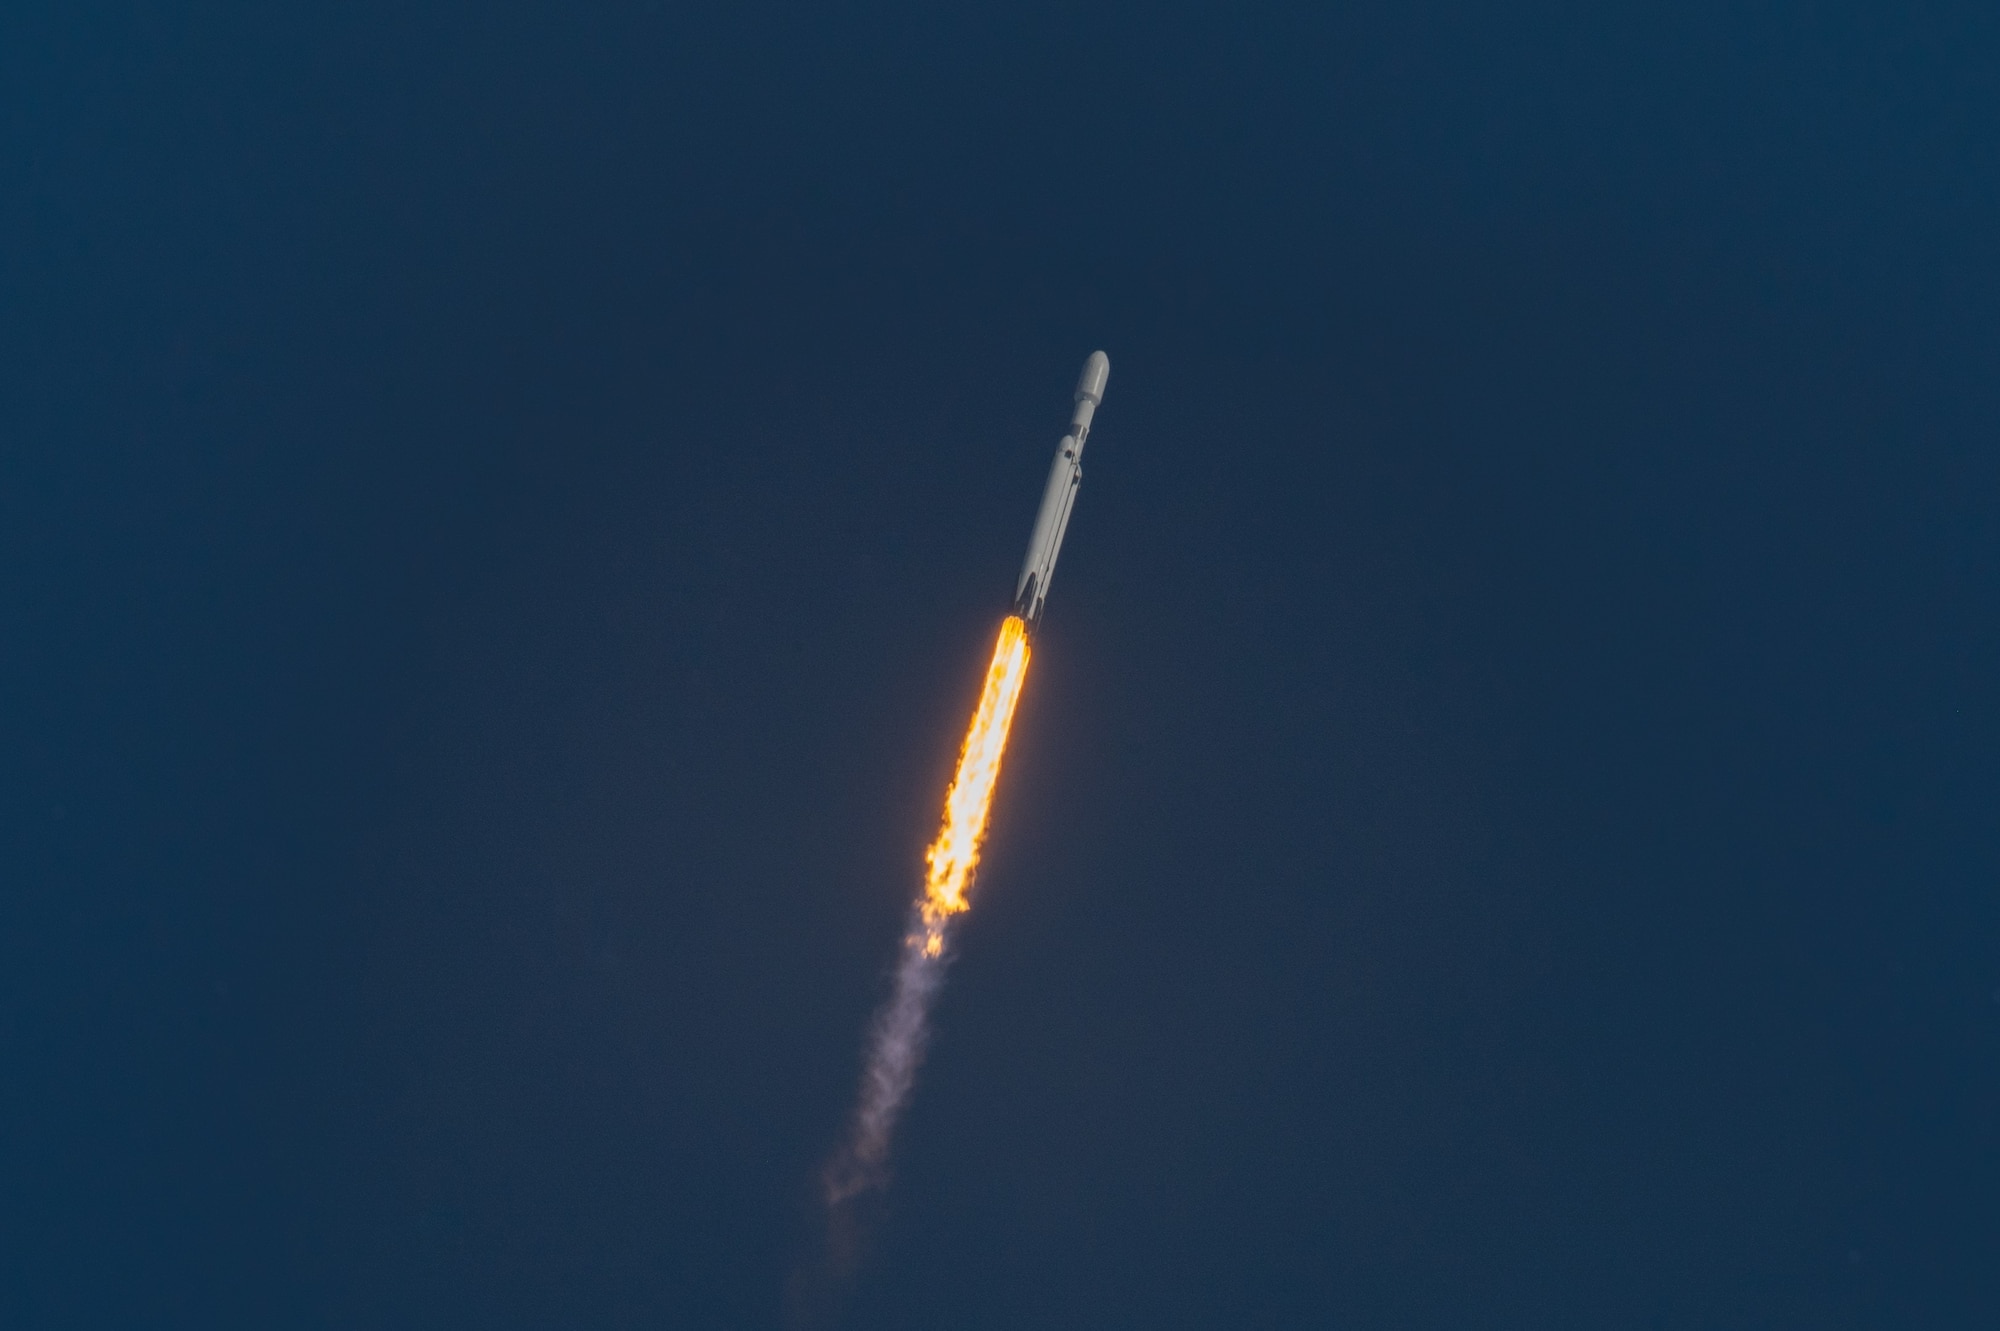 A Falcon Heavy rocket launches from Kennedy Space Center, Fla., Nov. 1, 2022. This was the first National Security Space Launch mission carried out on a Falcon Heavy rocket. (U.S. Space Force photo by Senior Airman Dakota Raub)